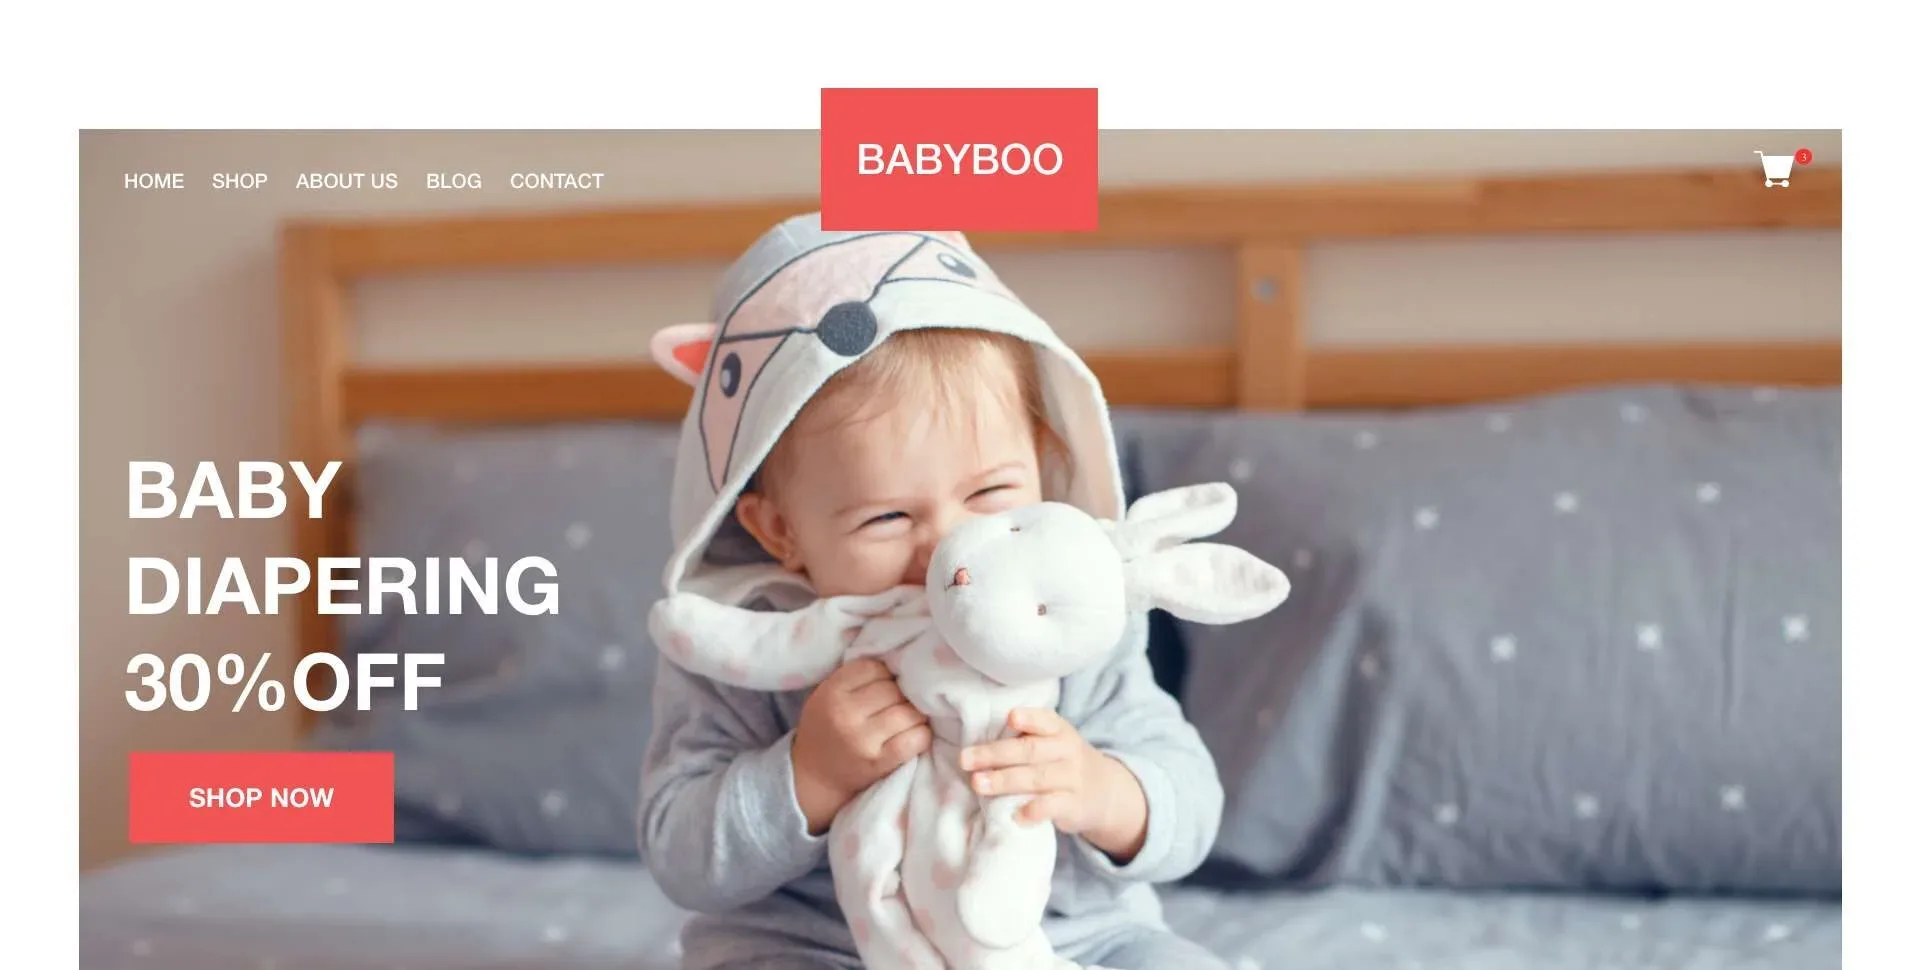 Baby Clothing & Accessories store expert shopify consulting services